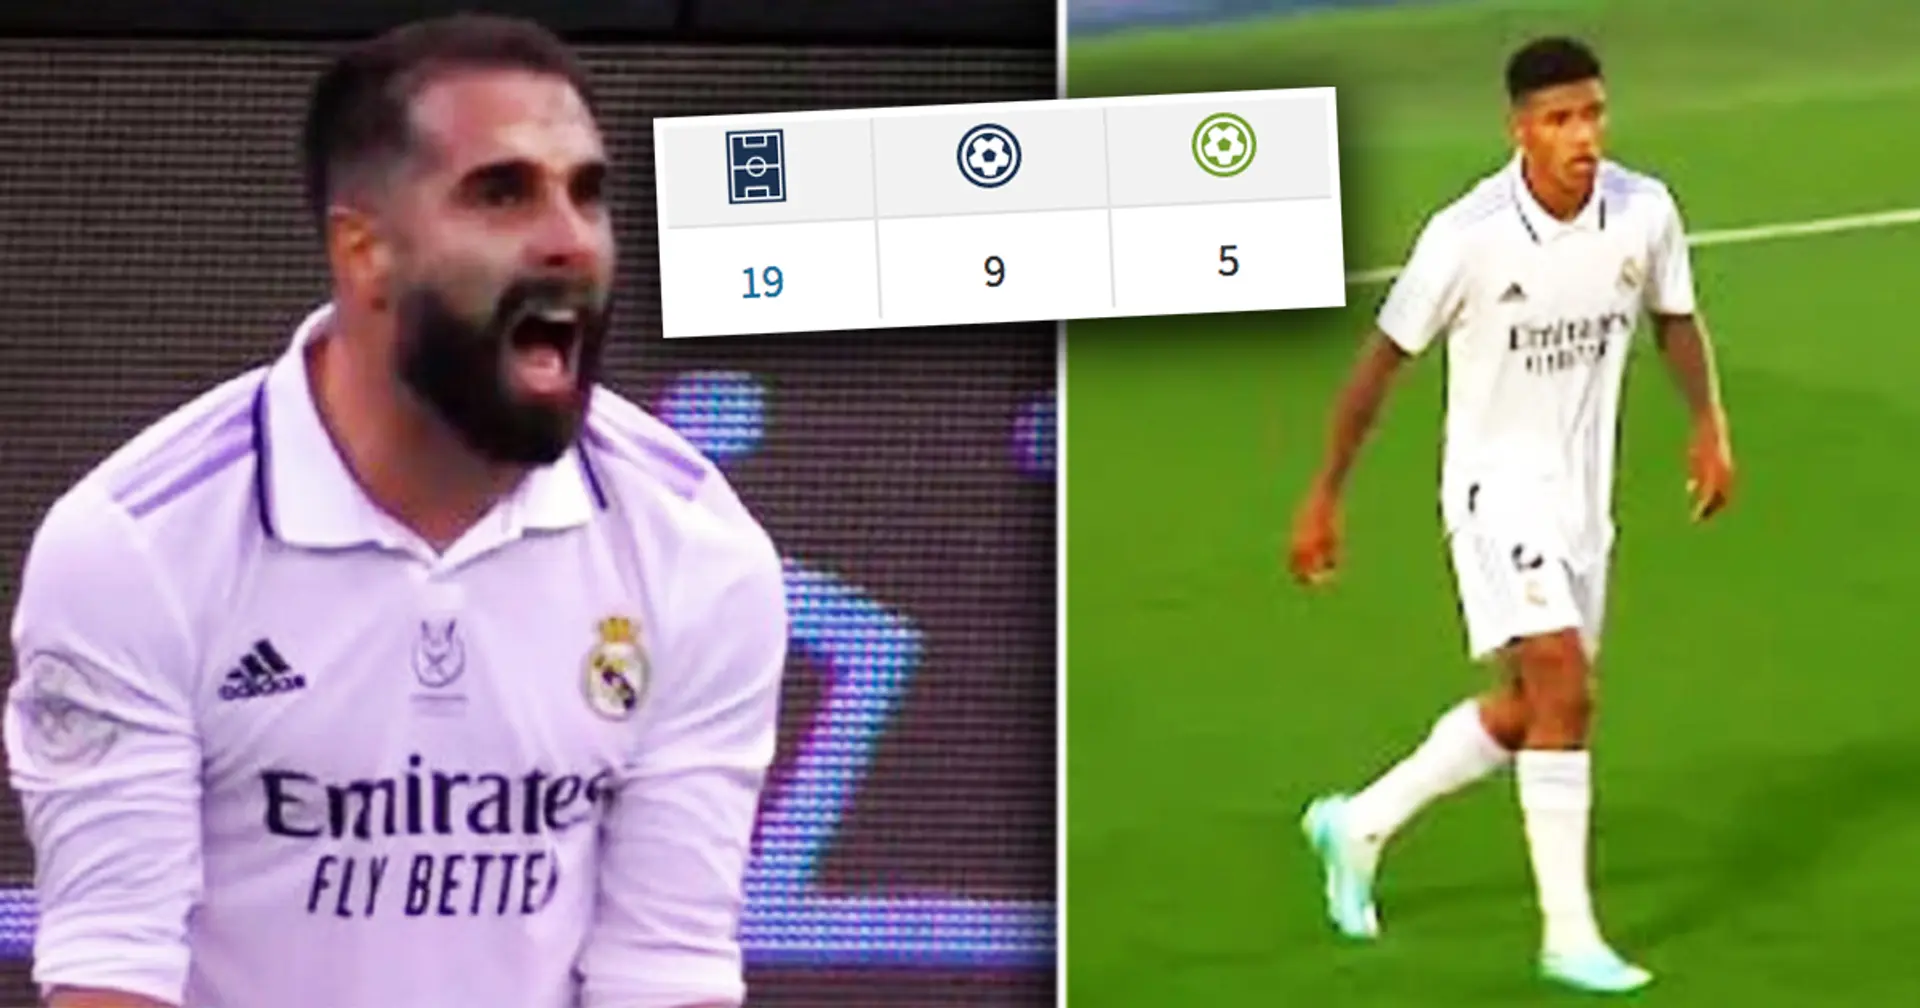 Fan shows 2 players who can breathe new life into Real Madrid – we don't even need to sign them